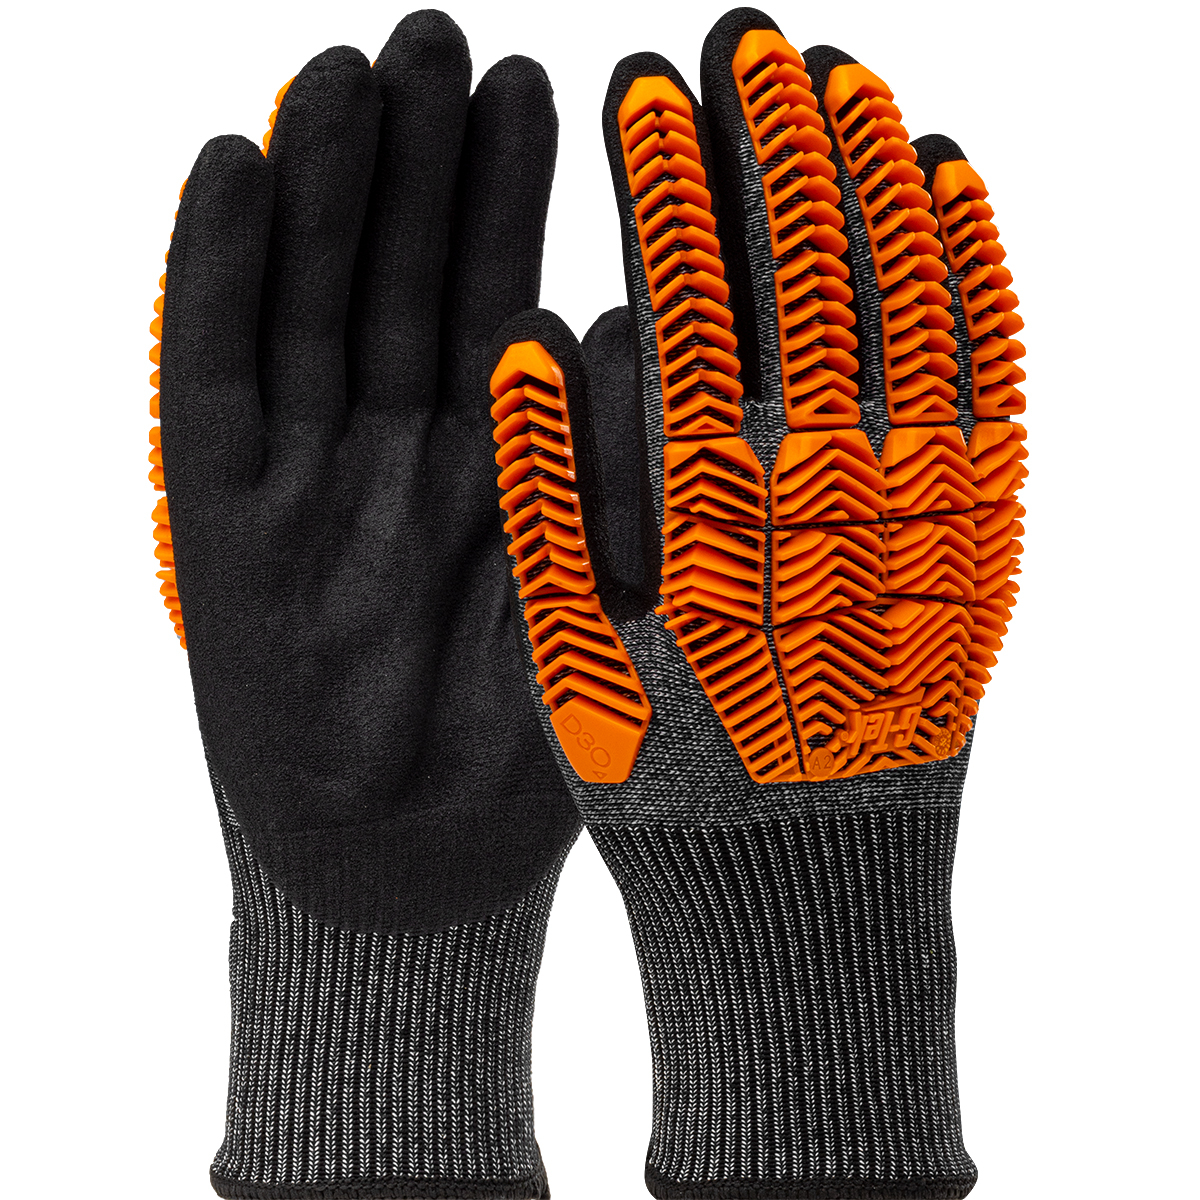 16-MPT630 G-Tek® PolyKor® A6 Seamless Knit PolyKor® Blended Glove with D3O® Impact Protection and Nitrile MicroSurface Coated Palm & Fingers